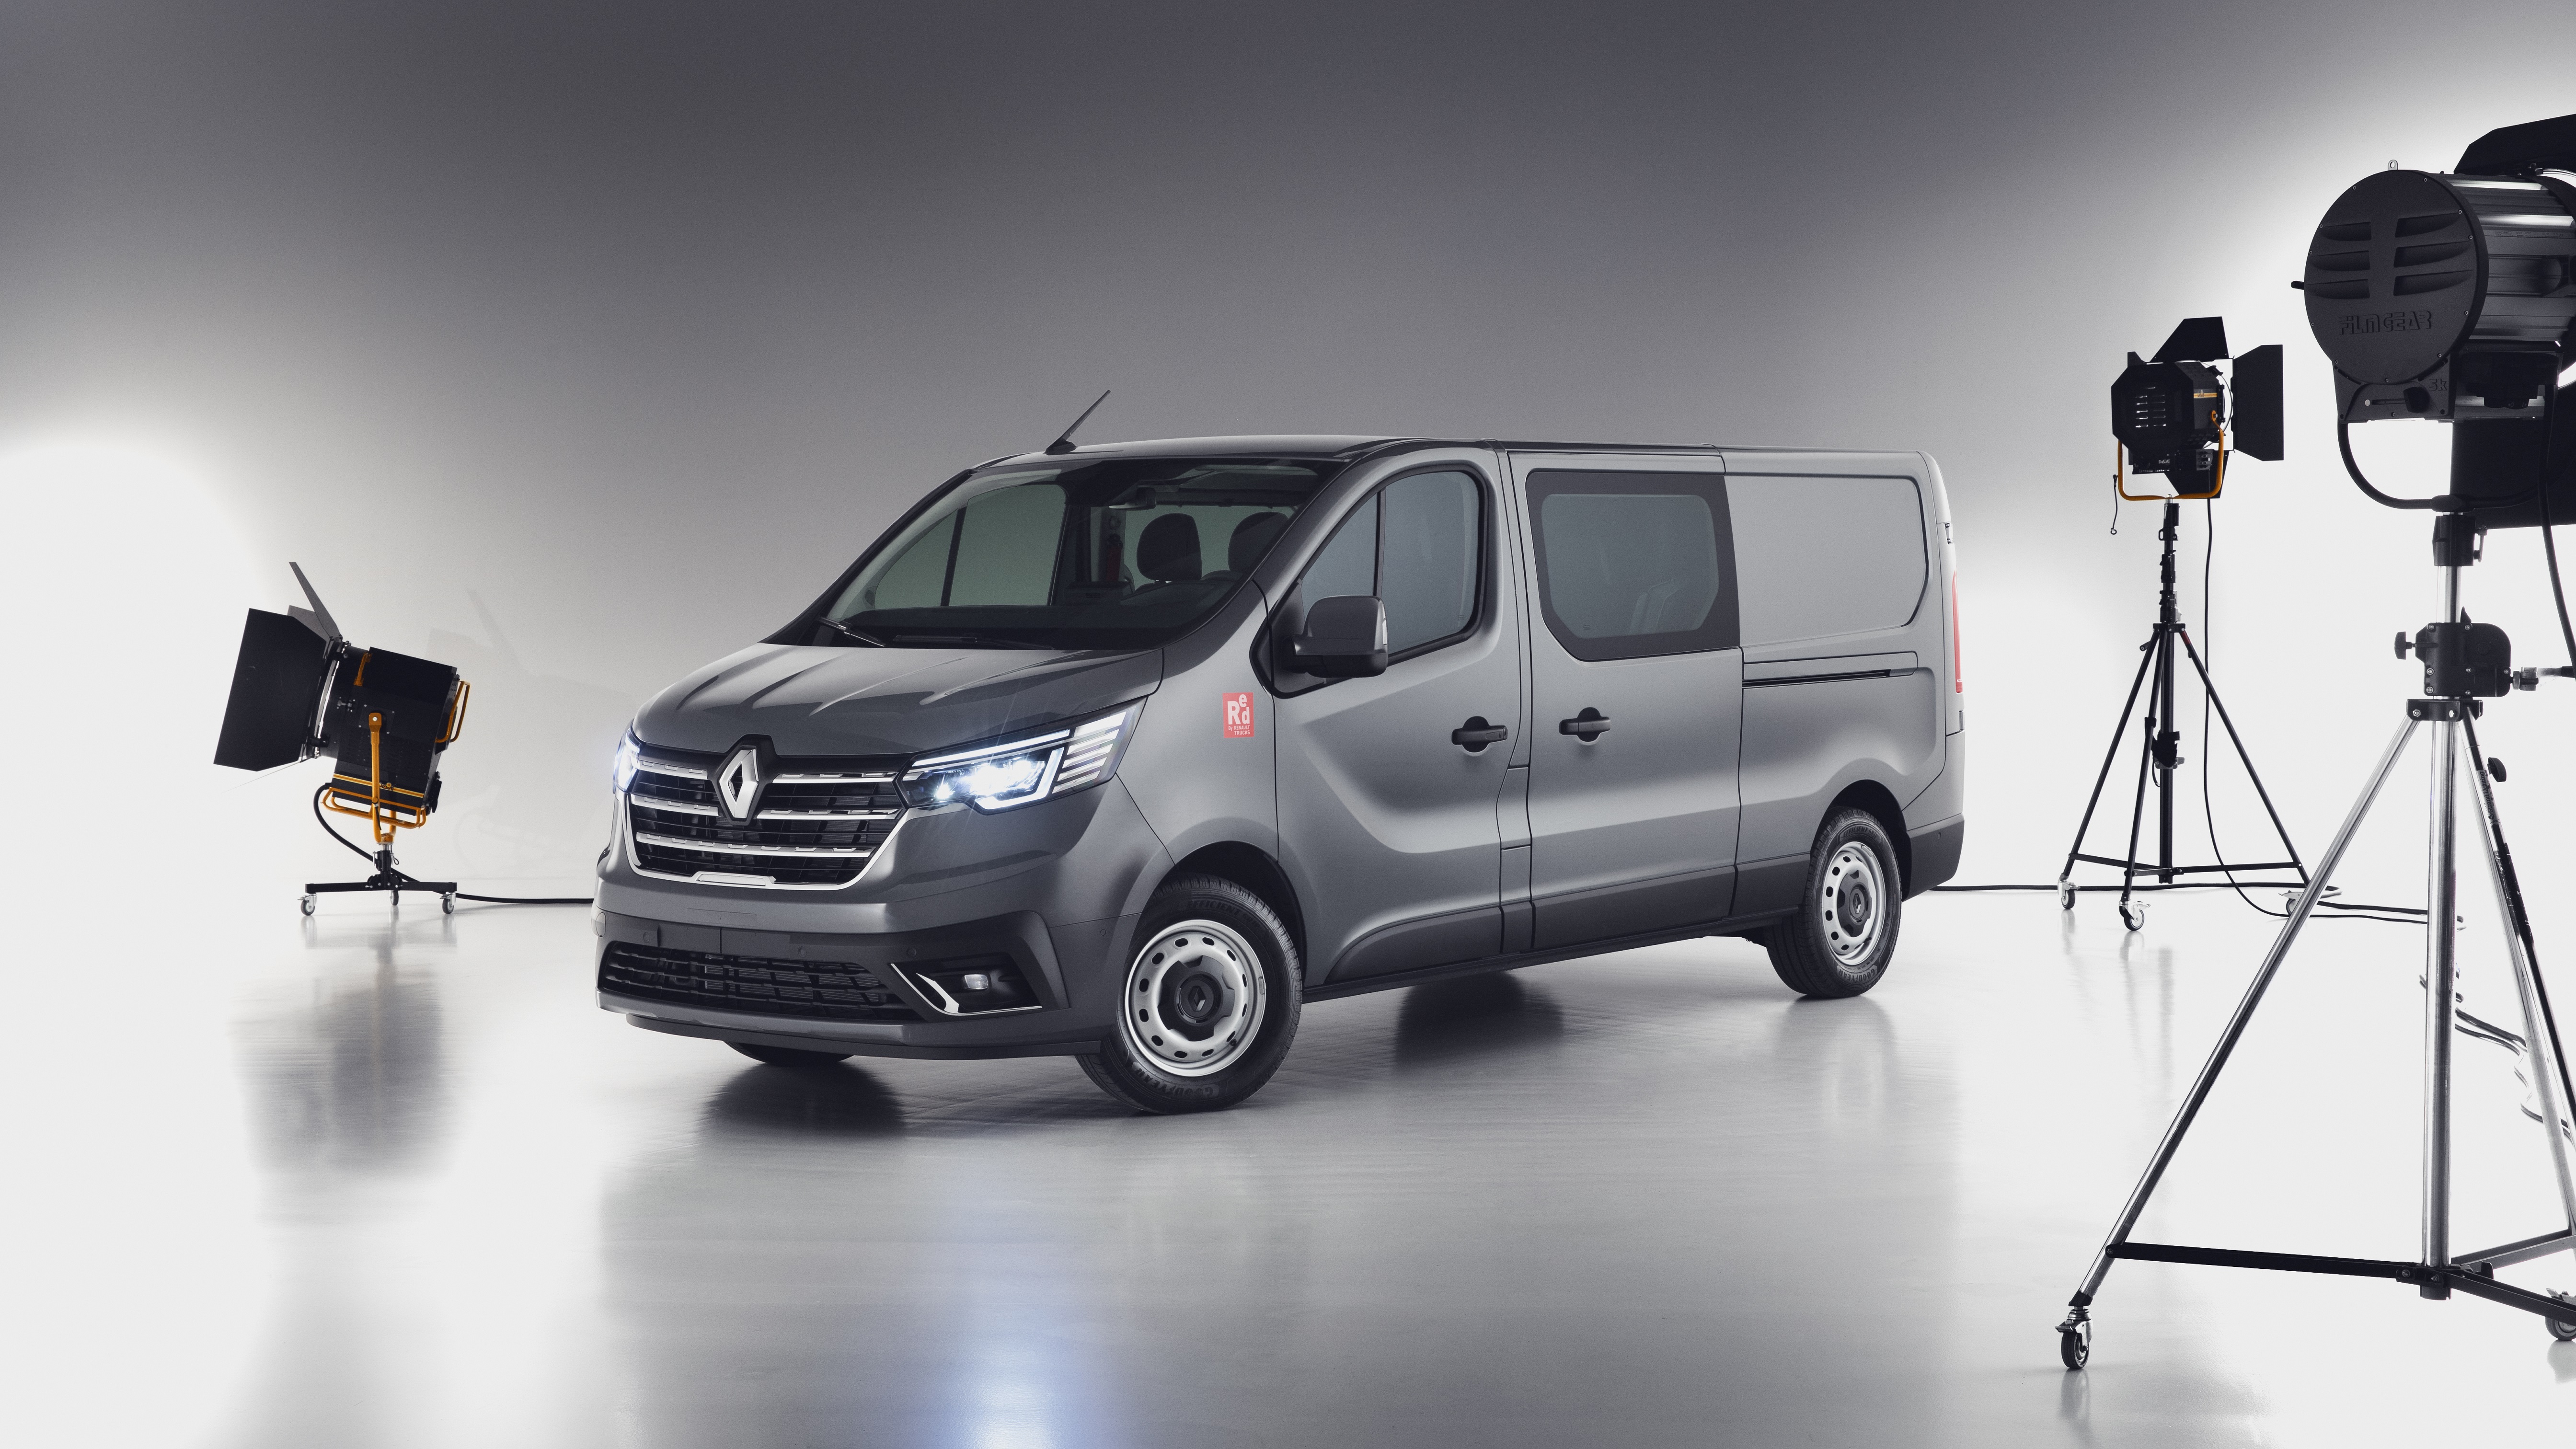 COMMERCIAL VEHICLES: RENAULT TRUCKS ANNOUNCES THE LAUNCH OF THE